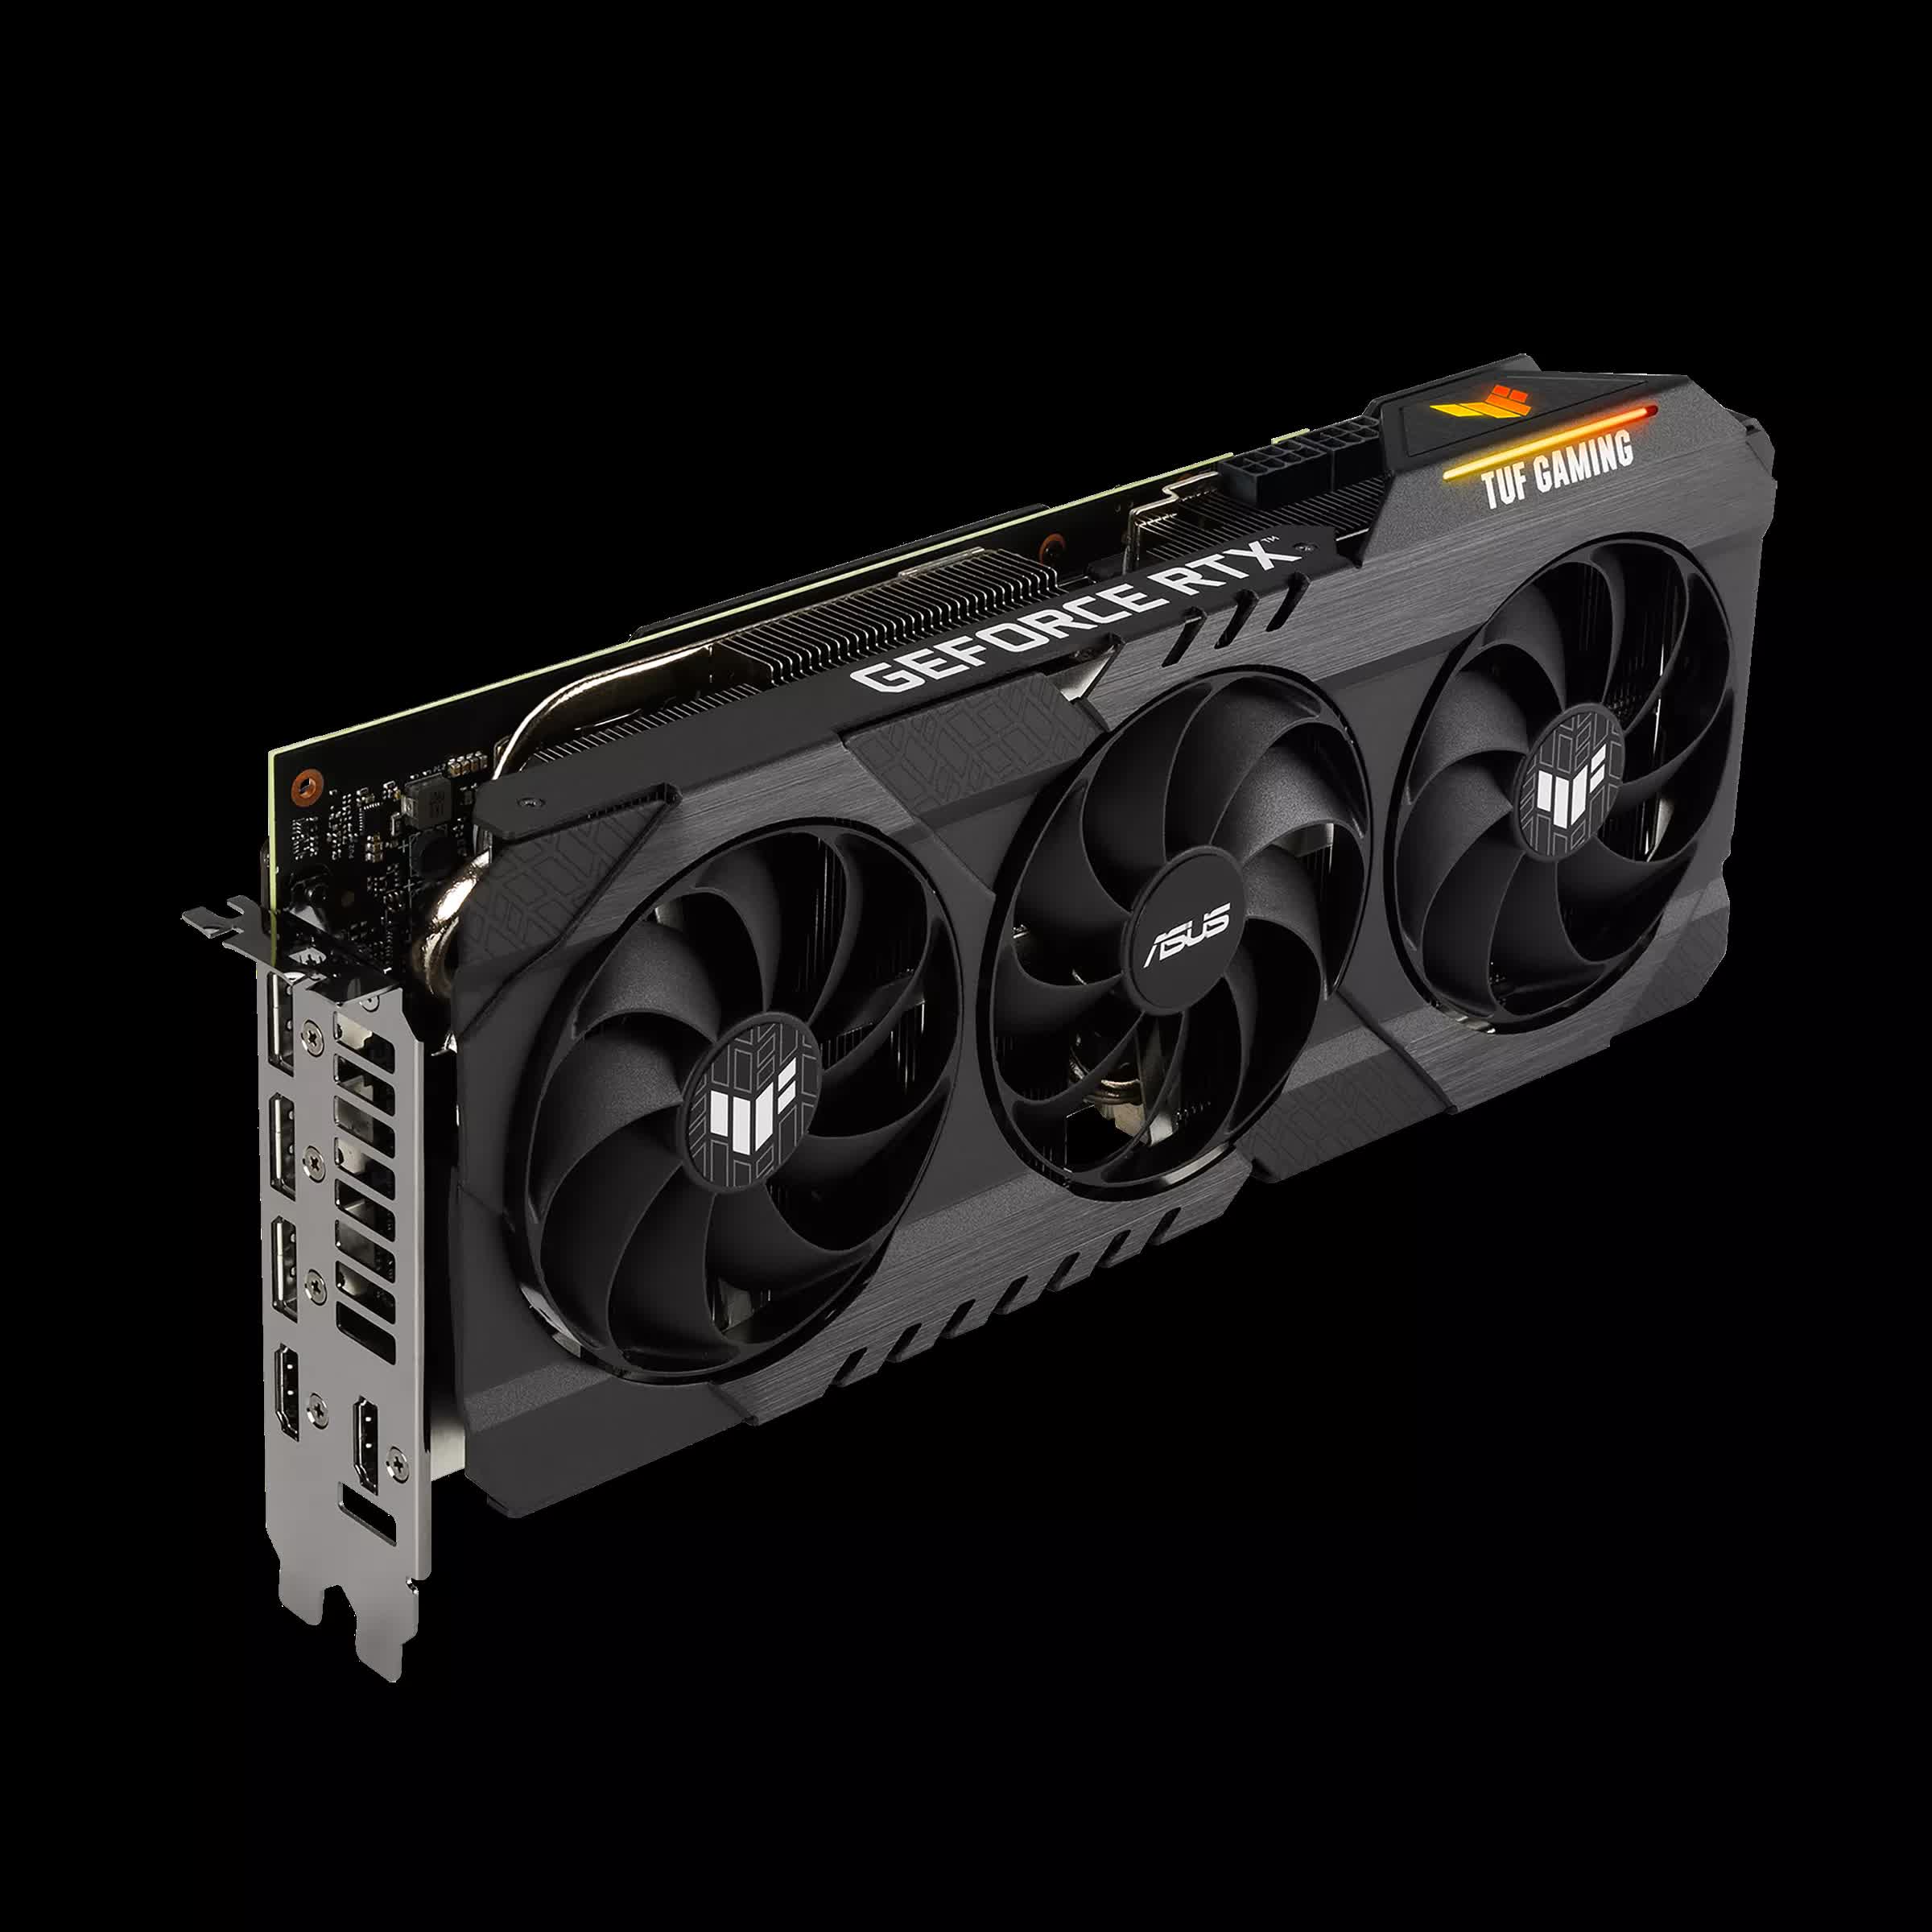 Updated Asus RTX 3060 Ti spotted with higher performance GDDR6X memory